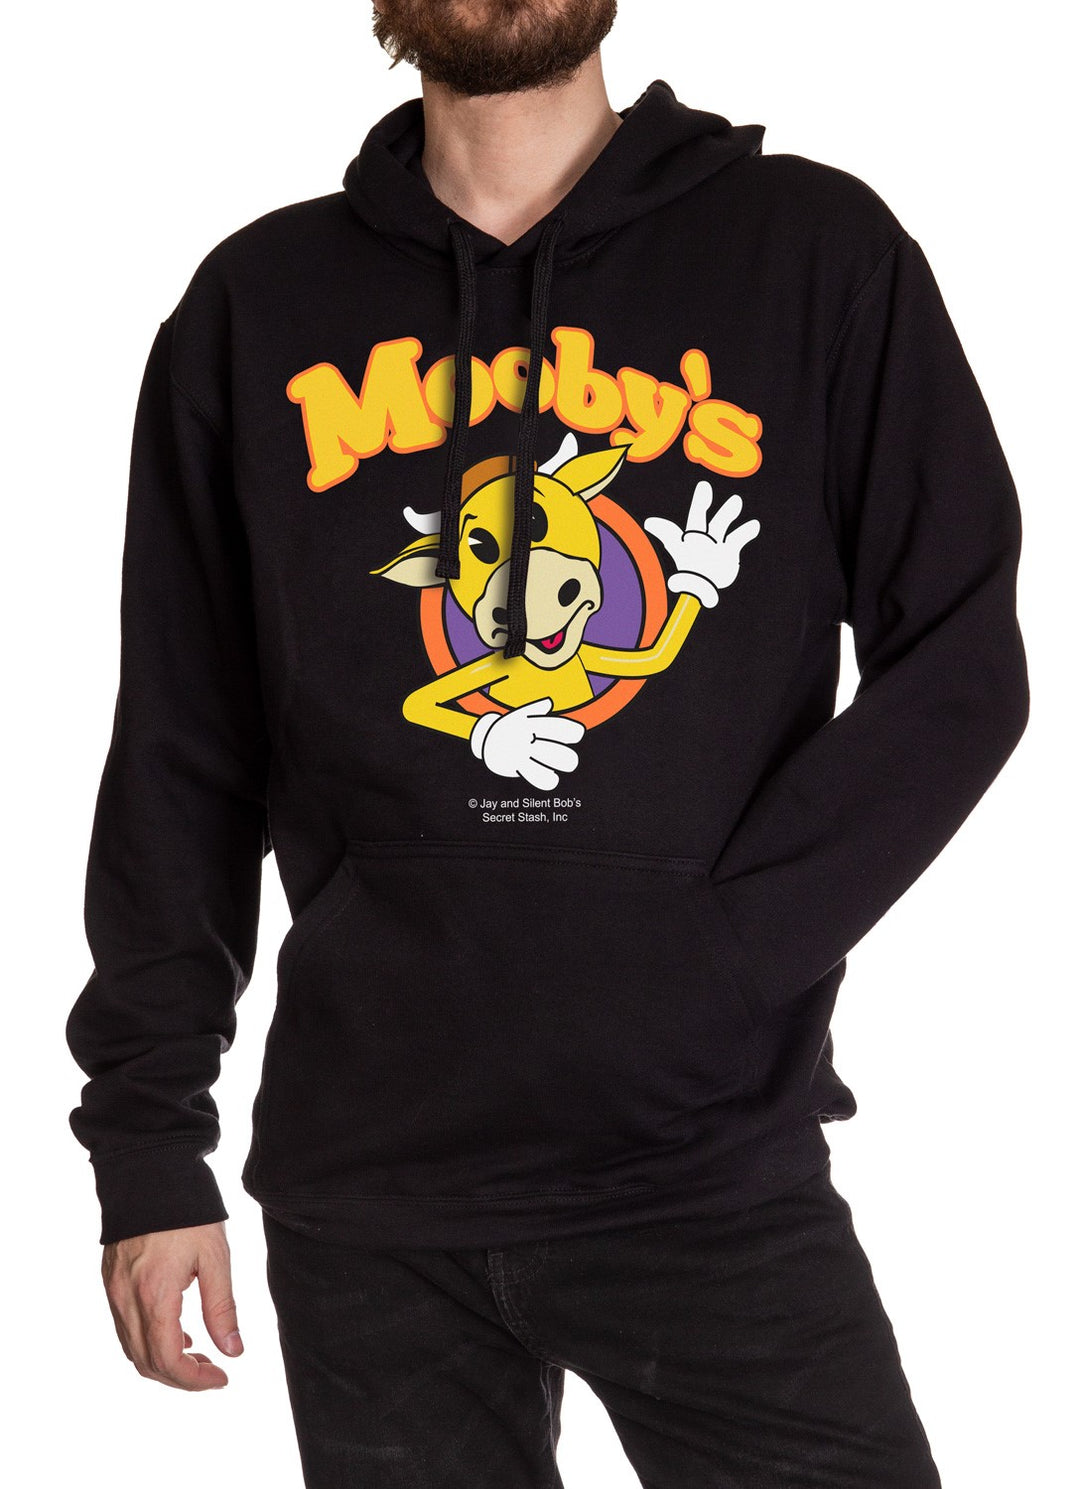 Mooby's Hoodie Sweater - Jay and Silent Bob